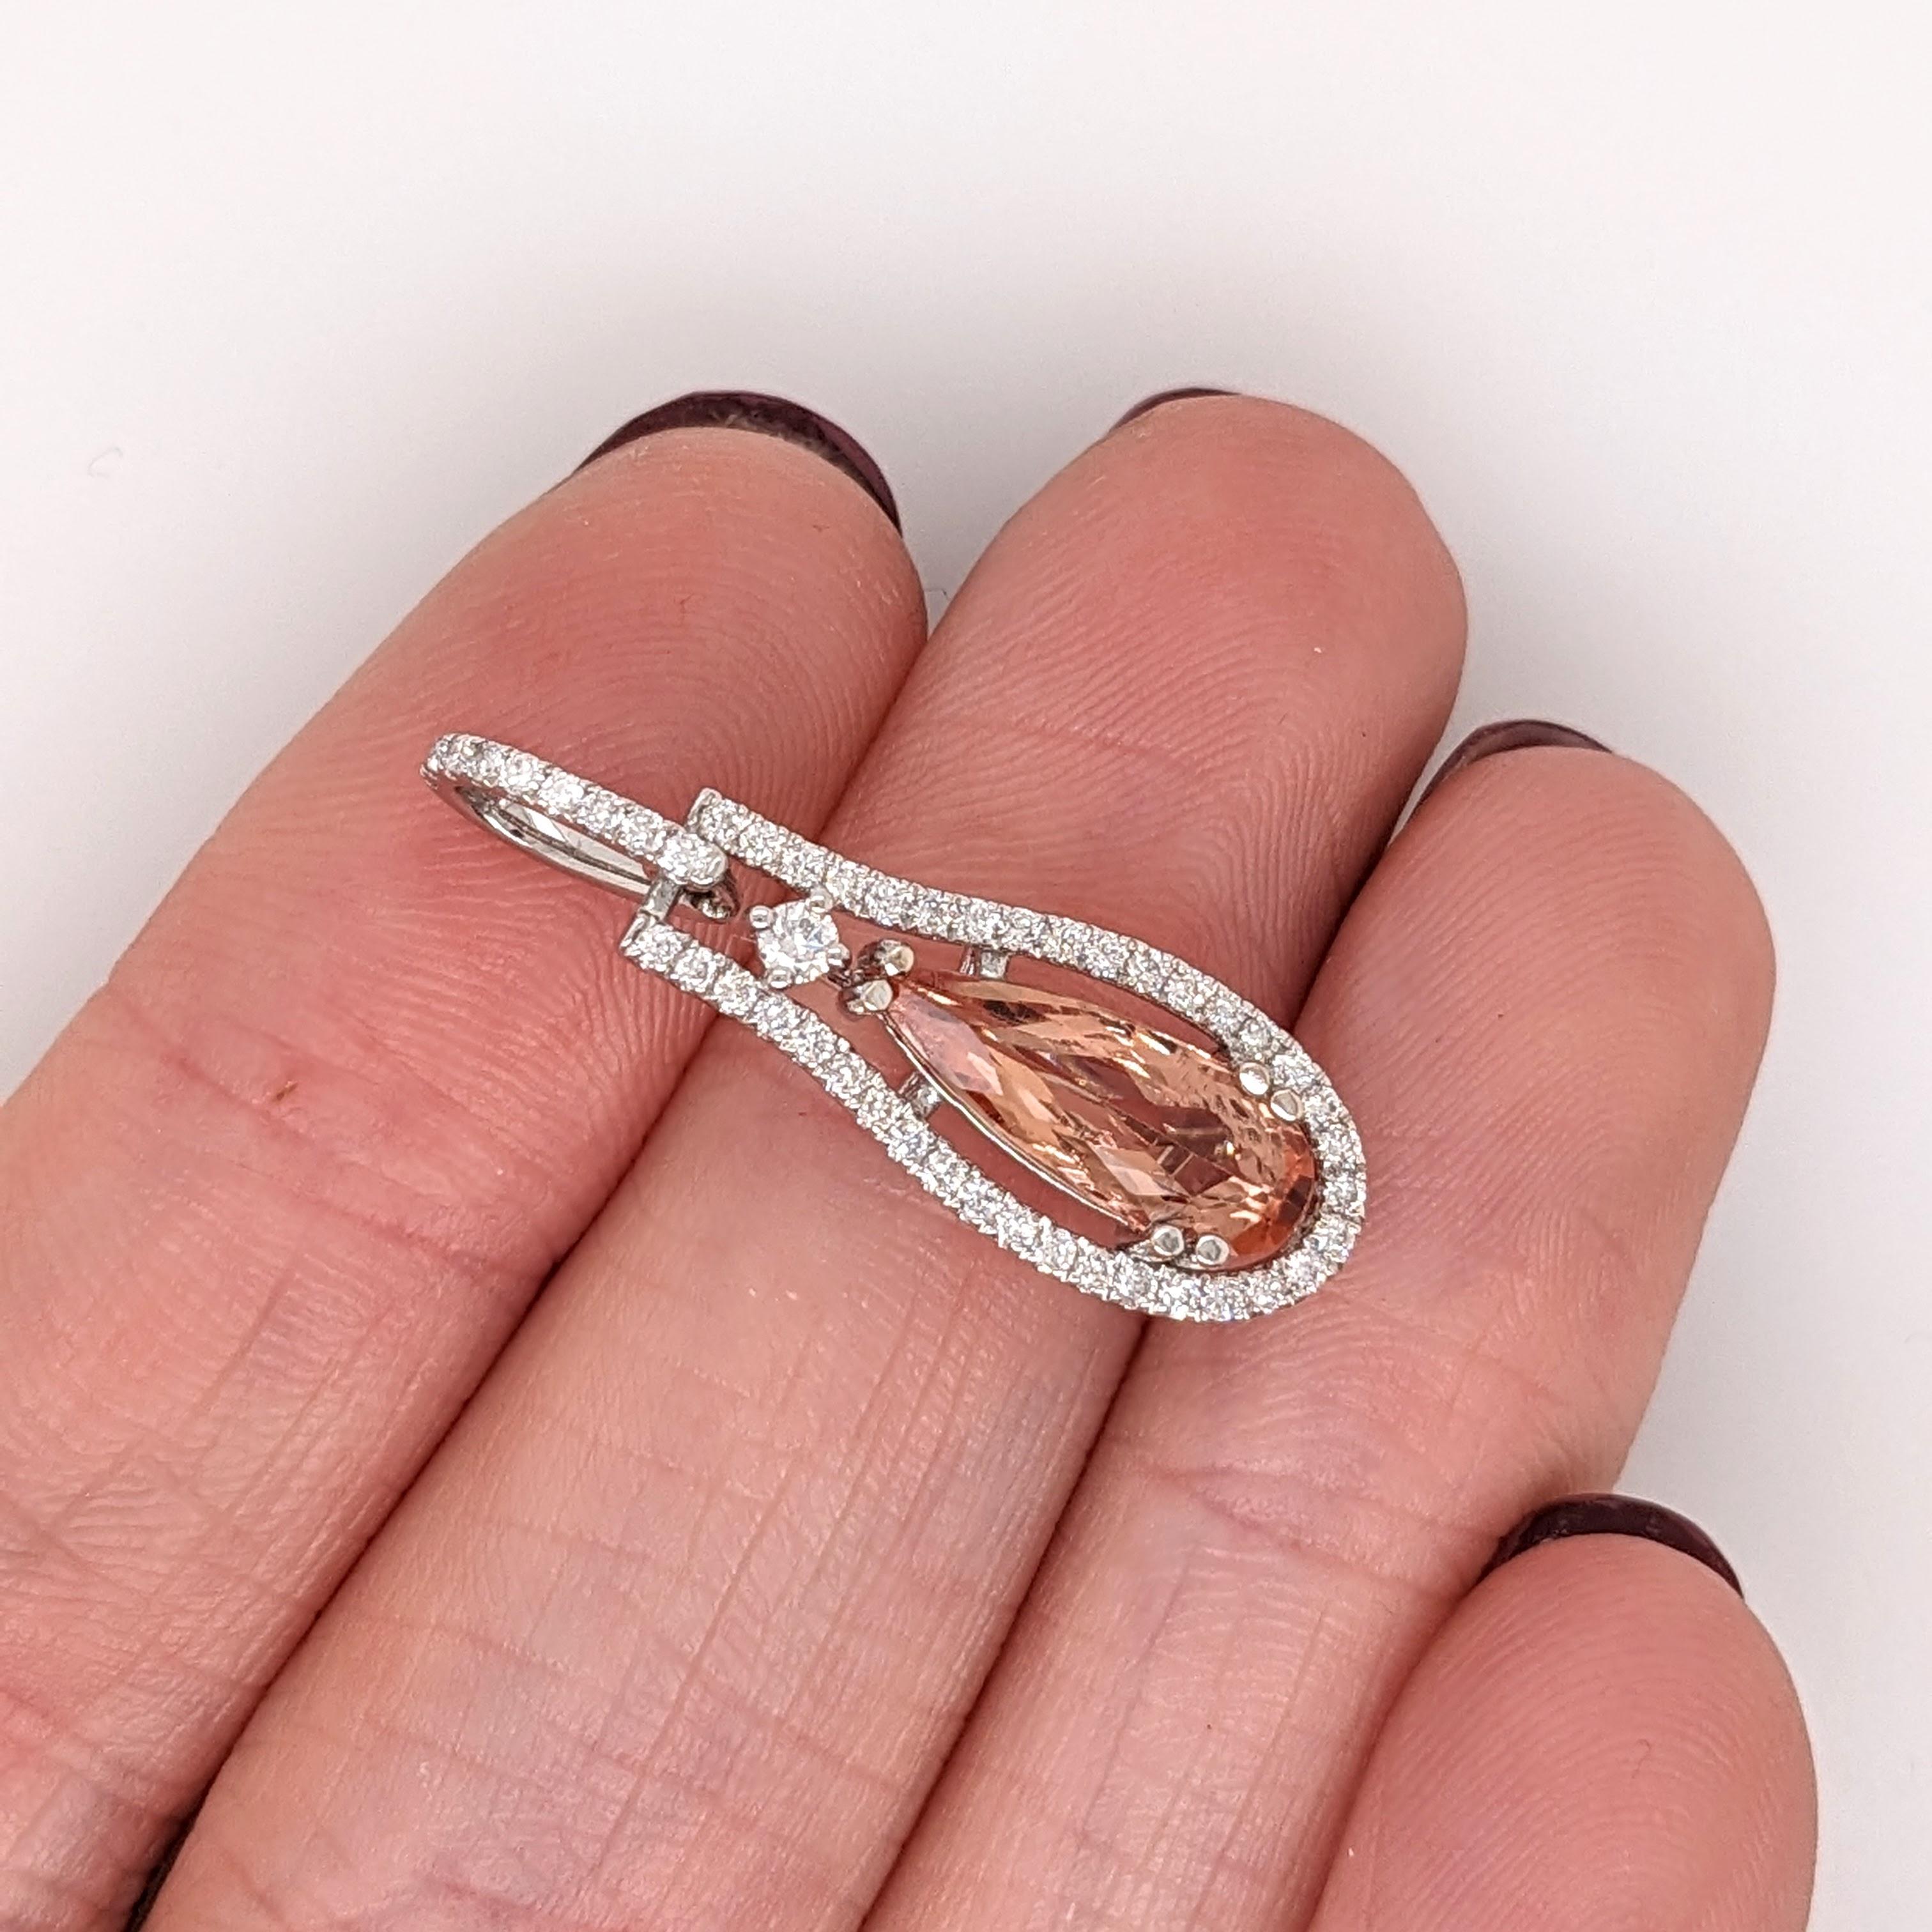 This beautiful pendant features a pear shape 1.57 carat imperial topaz with natural earth mined diamonds all set in solid 14K gold. This pendant makes a lovely november birthstone gift for your loved ones! 

Specifications

Item Type: Pendant
Center